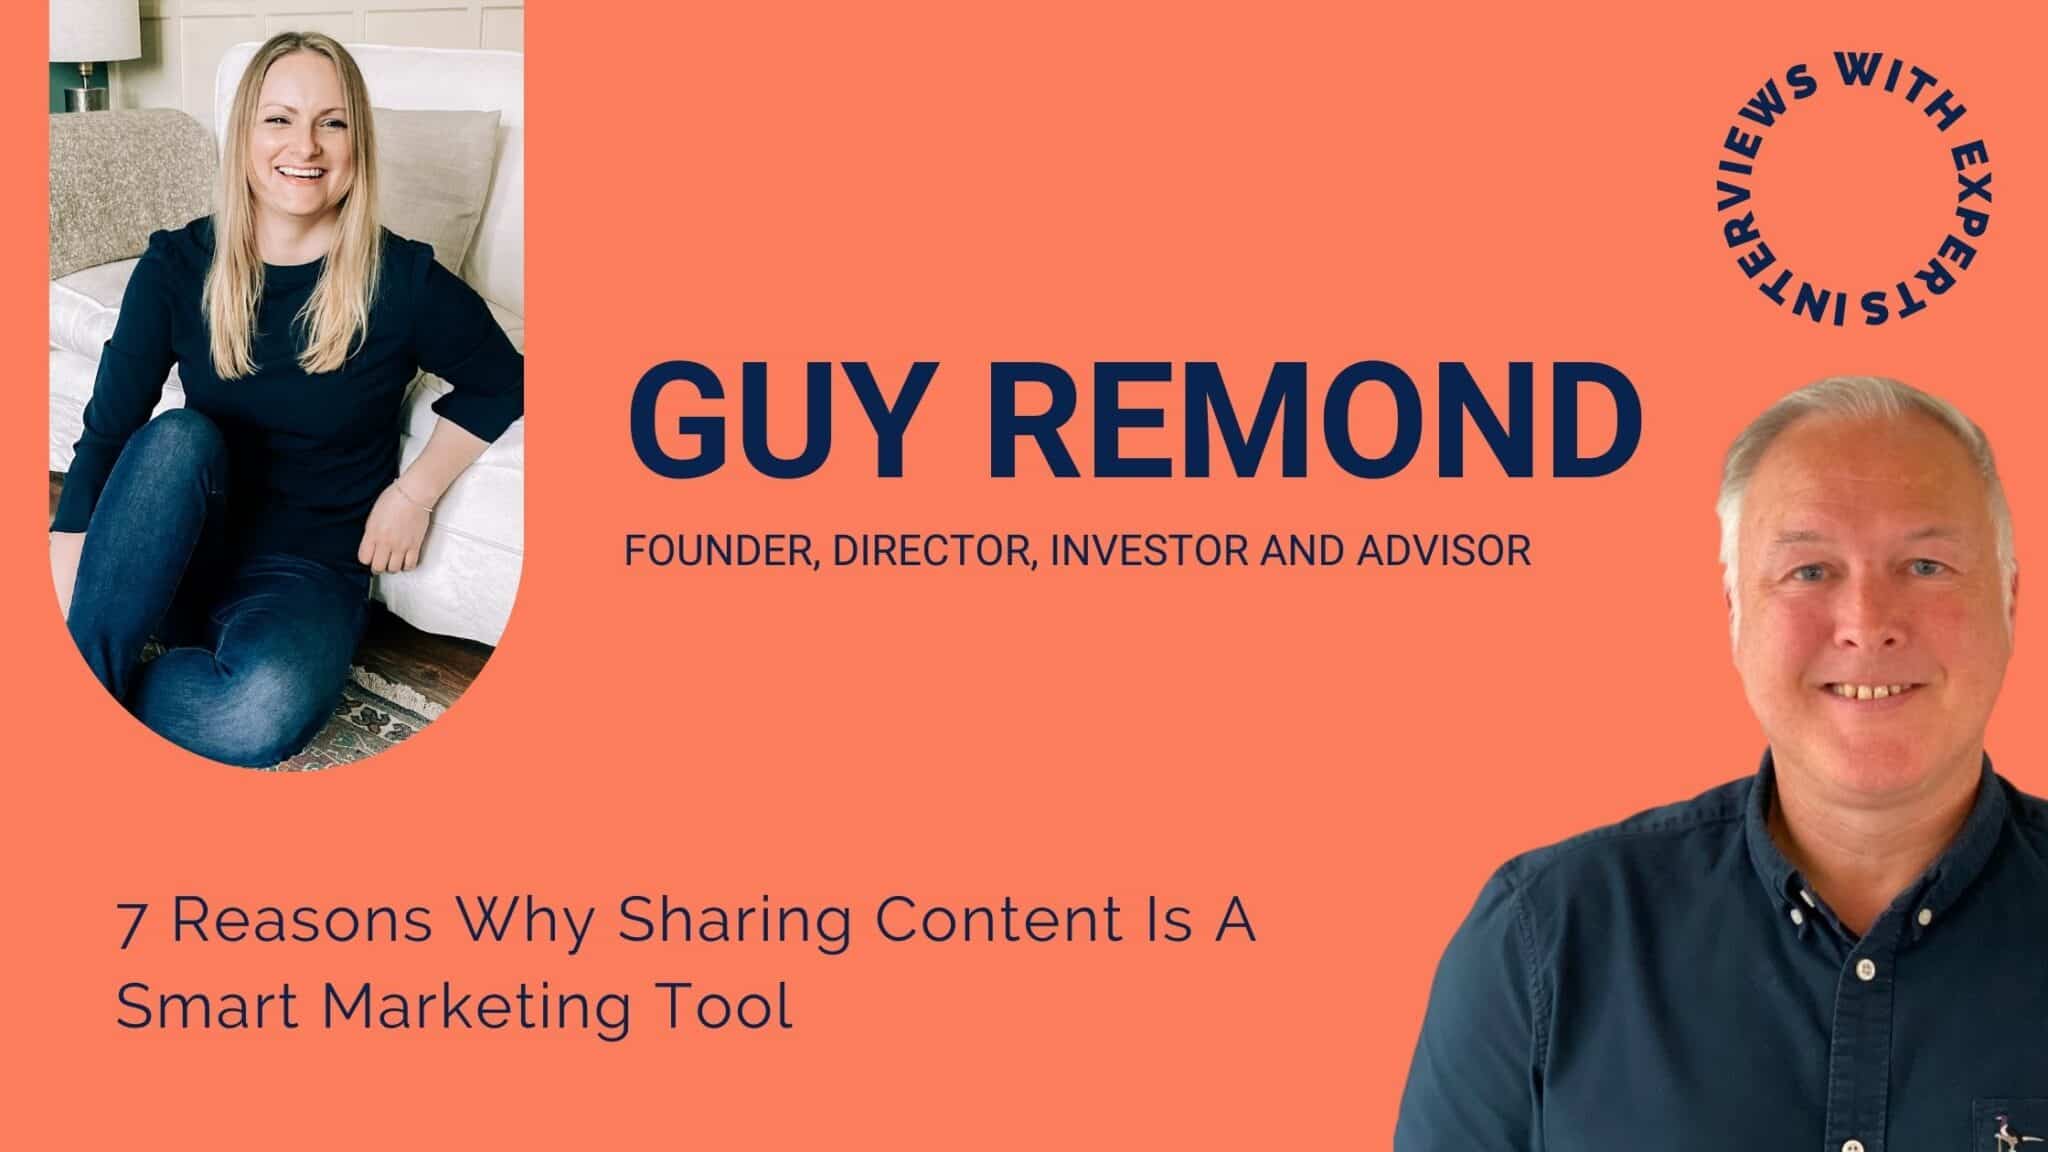 7 Reasons Why Sharing Content Is A Smart Marketing Tool